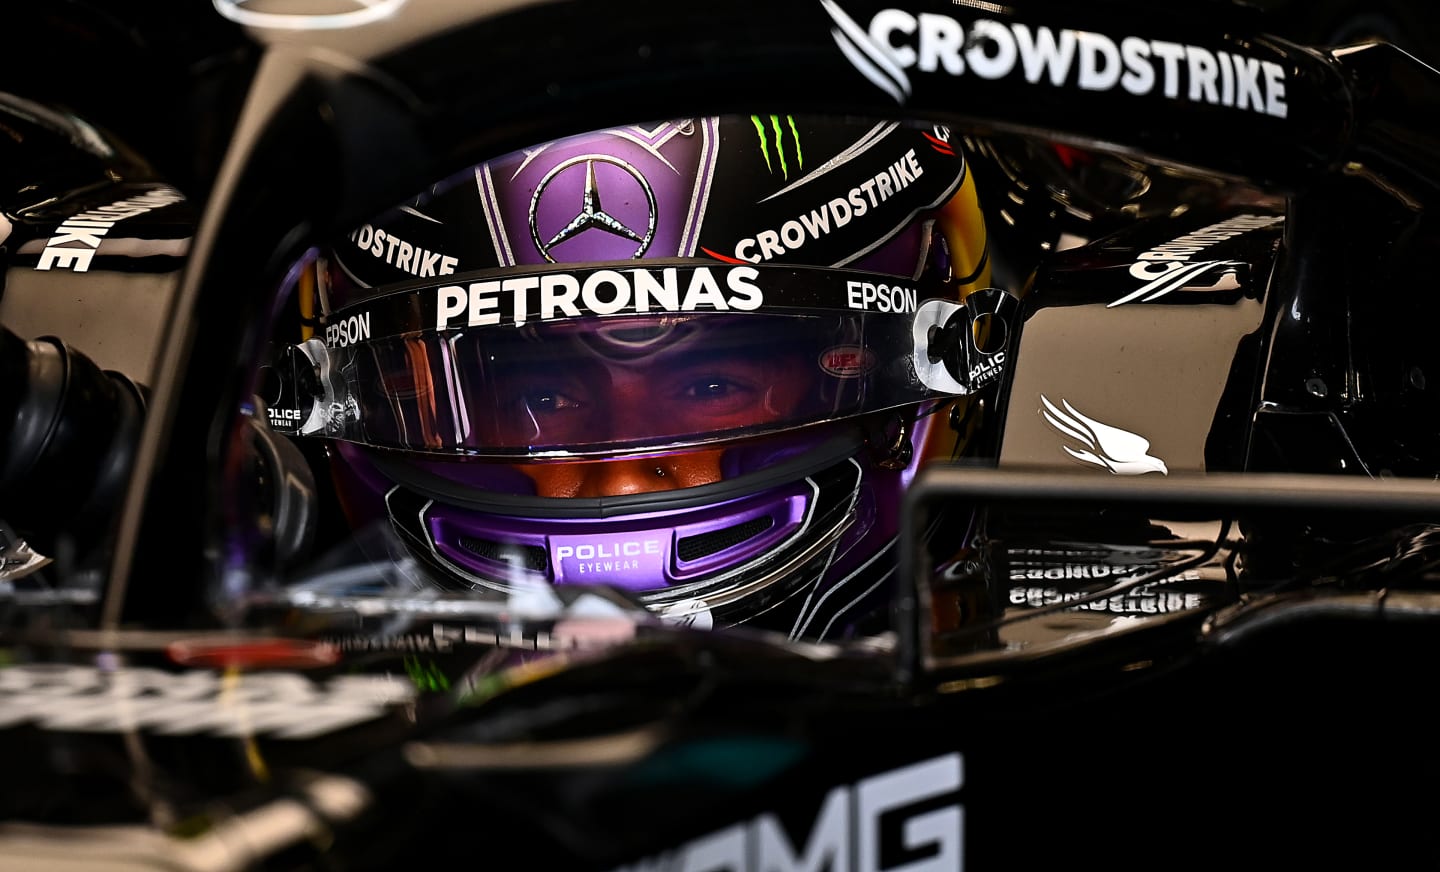 SAO PAULO, BRAZIL - NOVEMBER 12: Lewis Hamilton of Great Britain and Mercedes GP prepares to drive in the garage during practice ahead of the F1 Grand Prix of Brazil at Autodromo Jose Carlos Pace on November 12, 2021 in Sao Paulo, Brazil. (Photo by Clive Mason - Formula 1/Formula 1 via Getty Images)